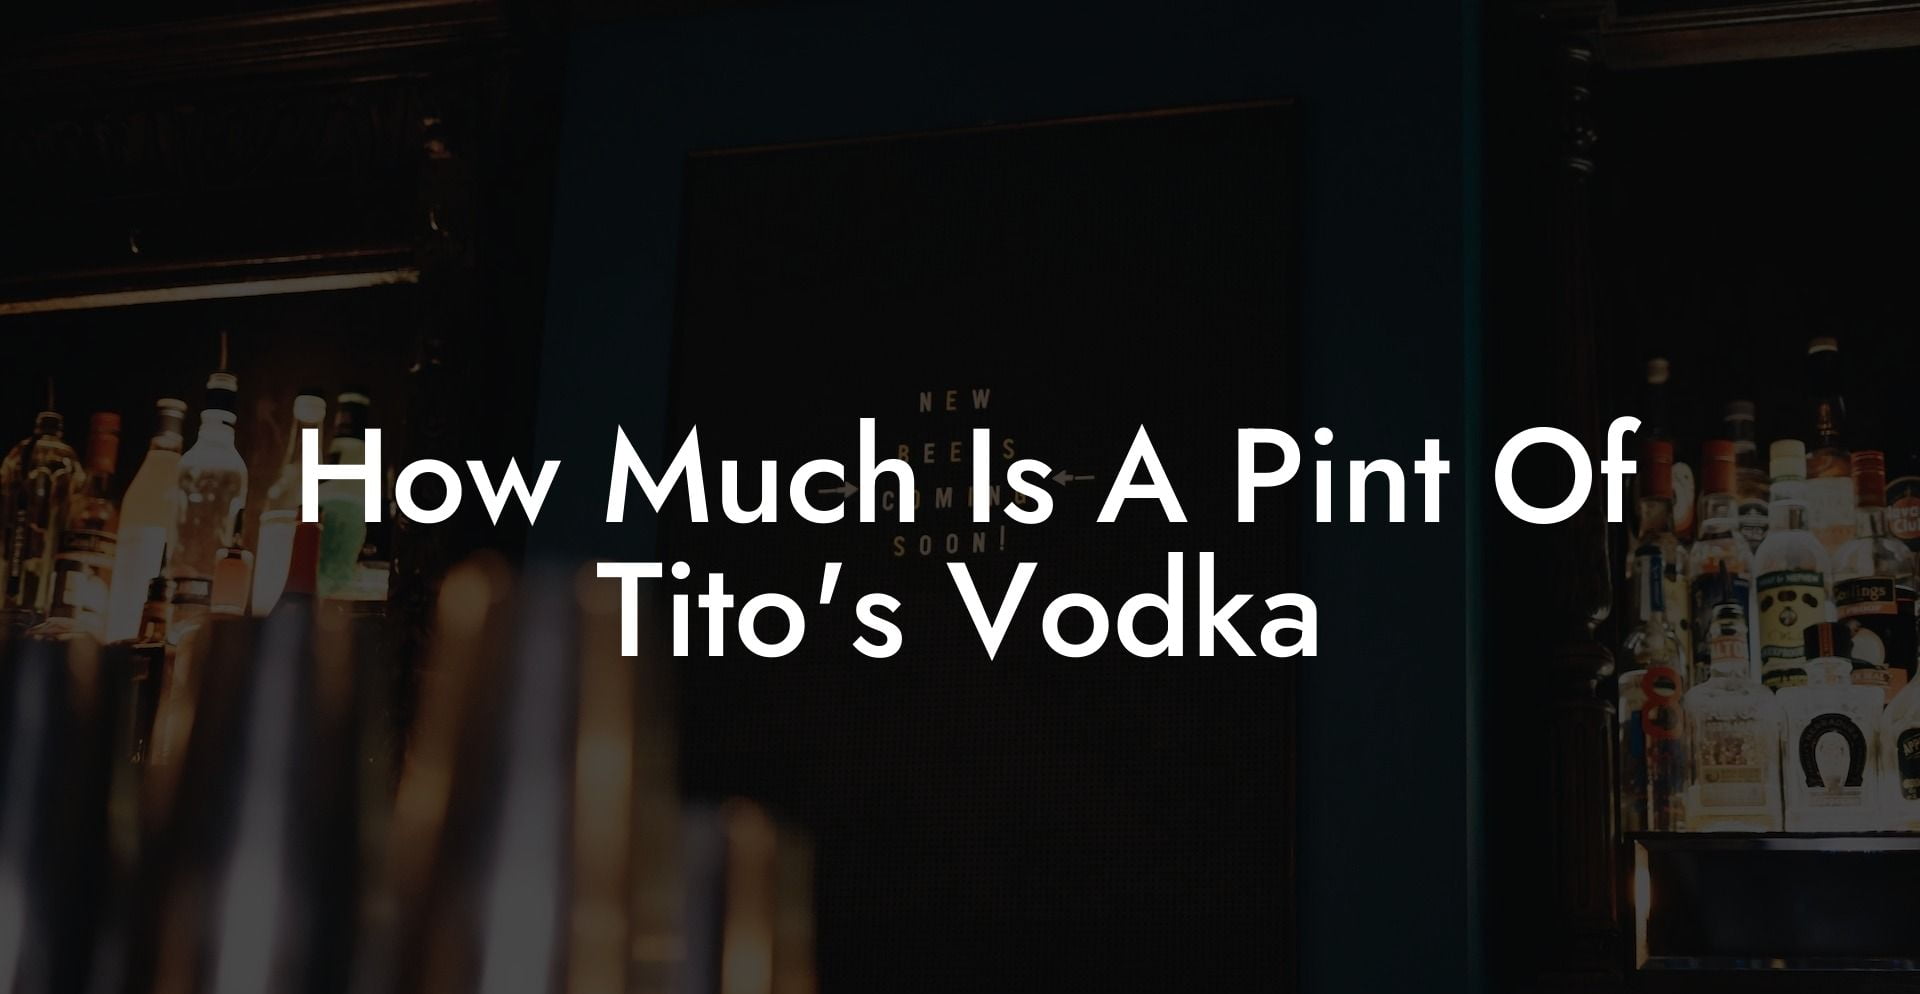 How Much Is A Pint Of Tito's Vodka